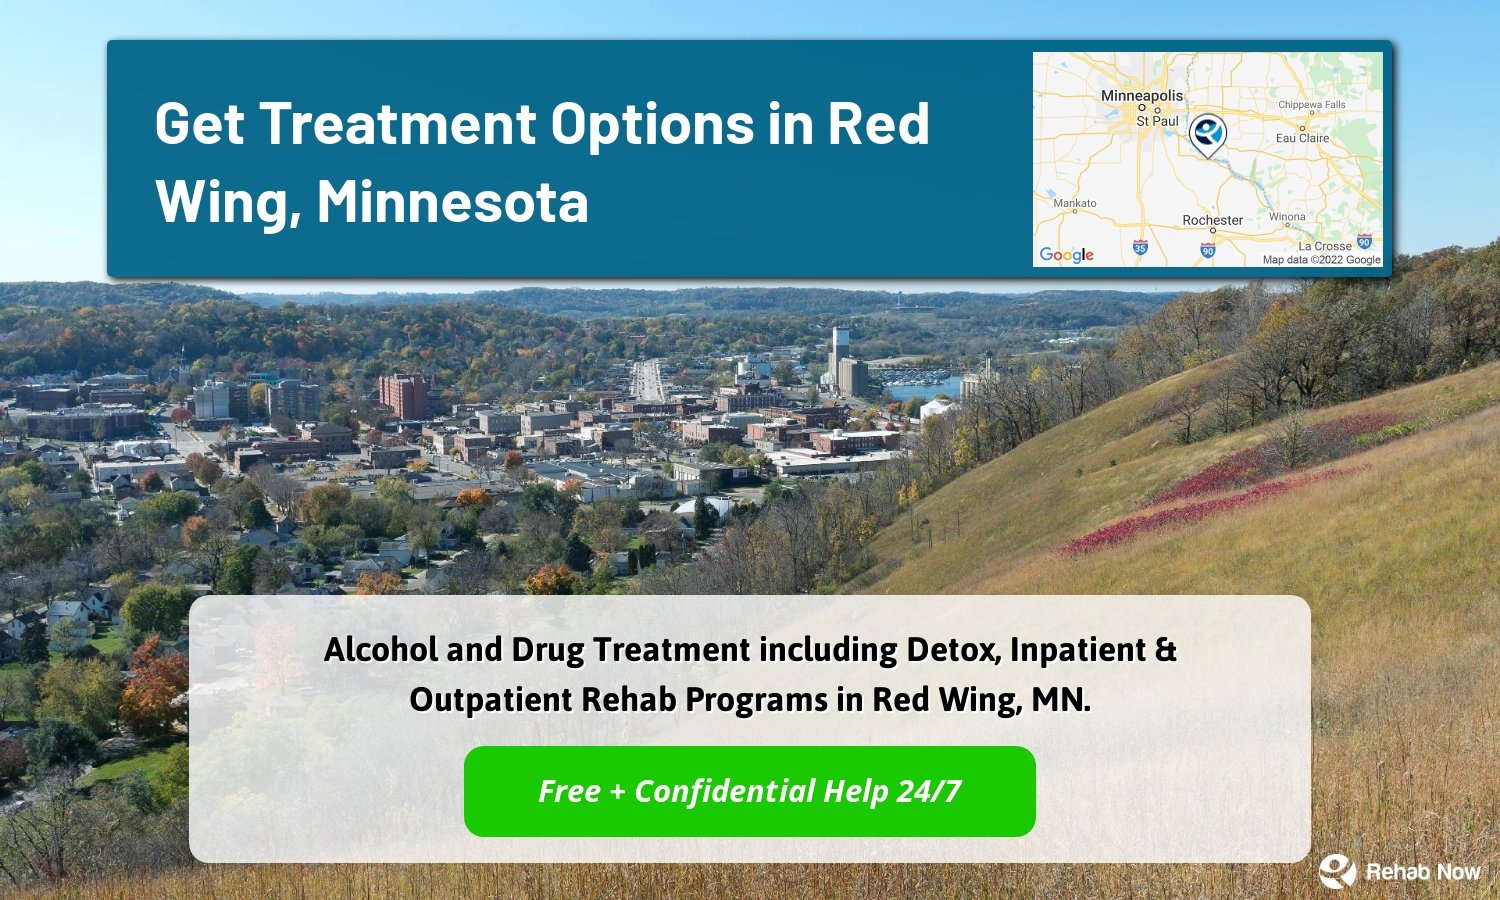 Alcohol and Drug Treatment including Detox, Inpatient & Outpatient Rehab Programs in Red Wing, MN.